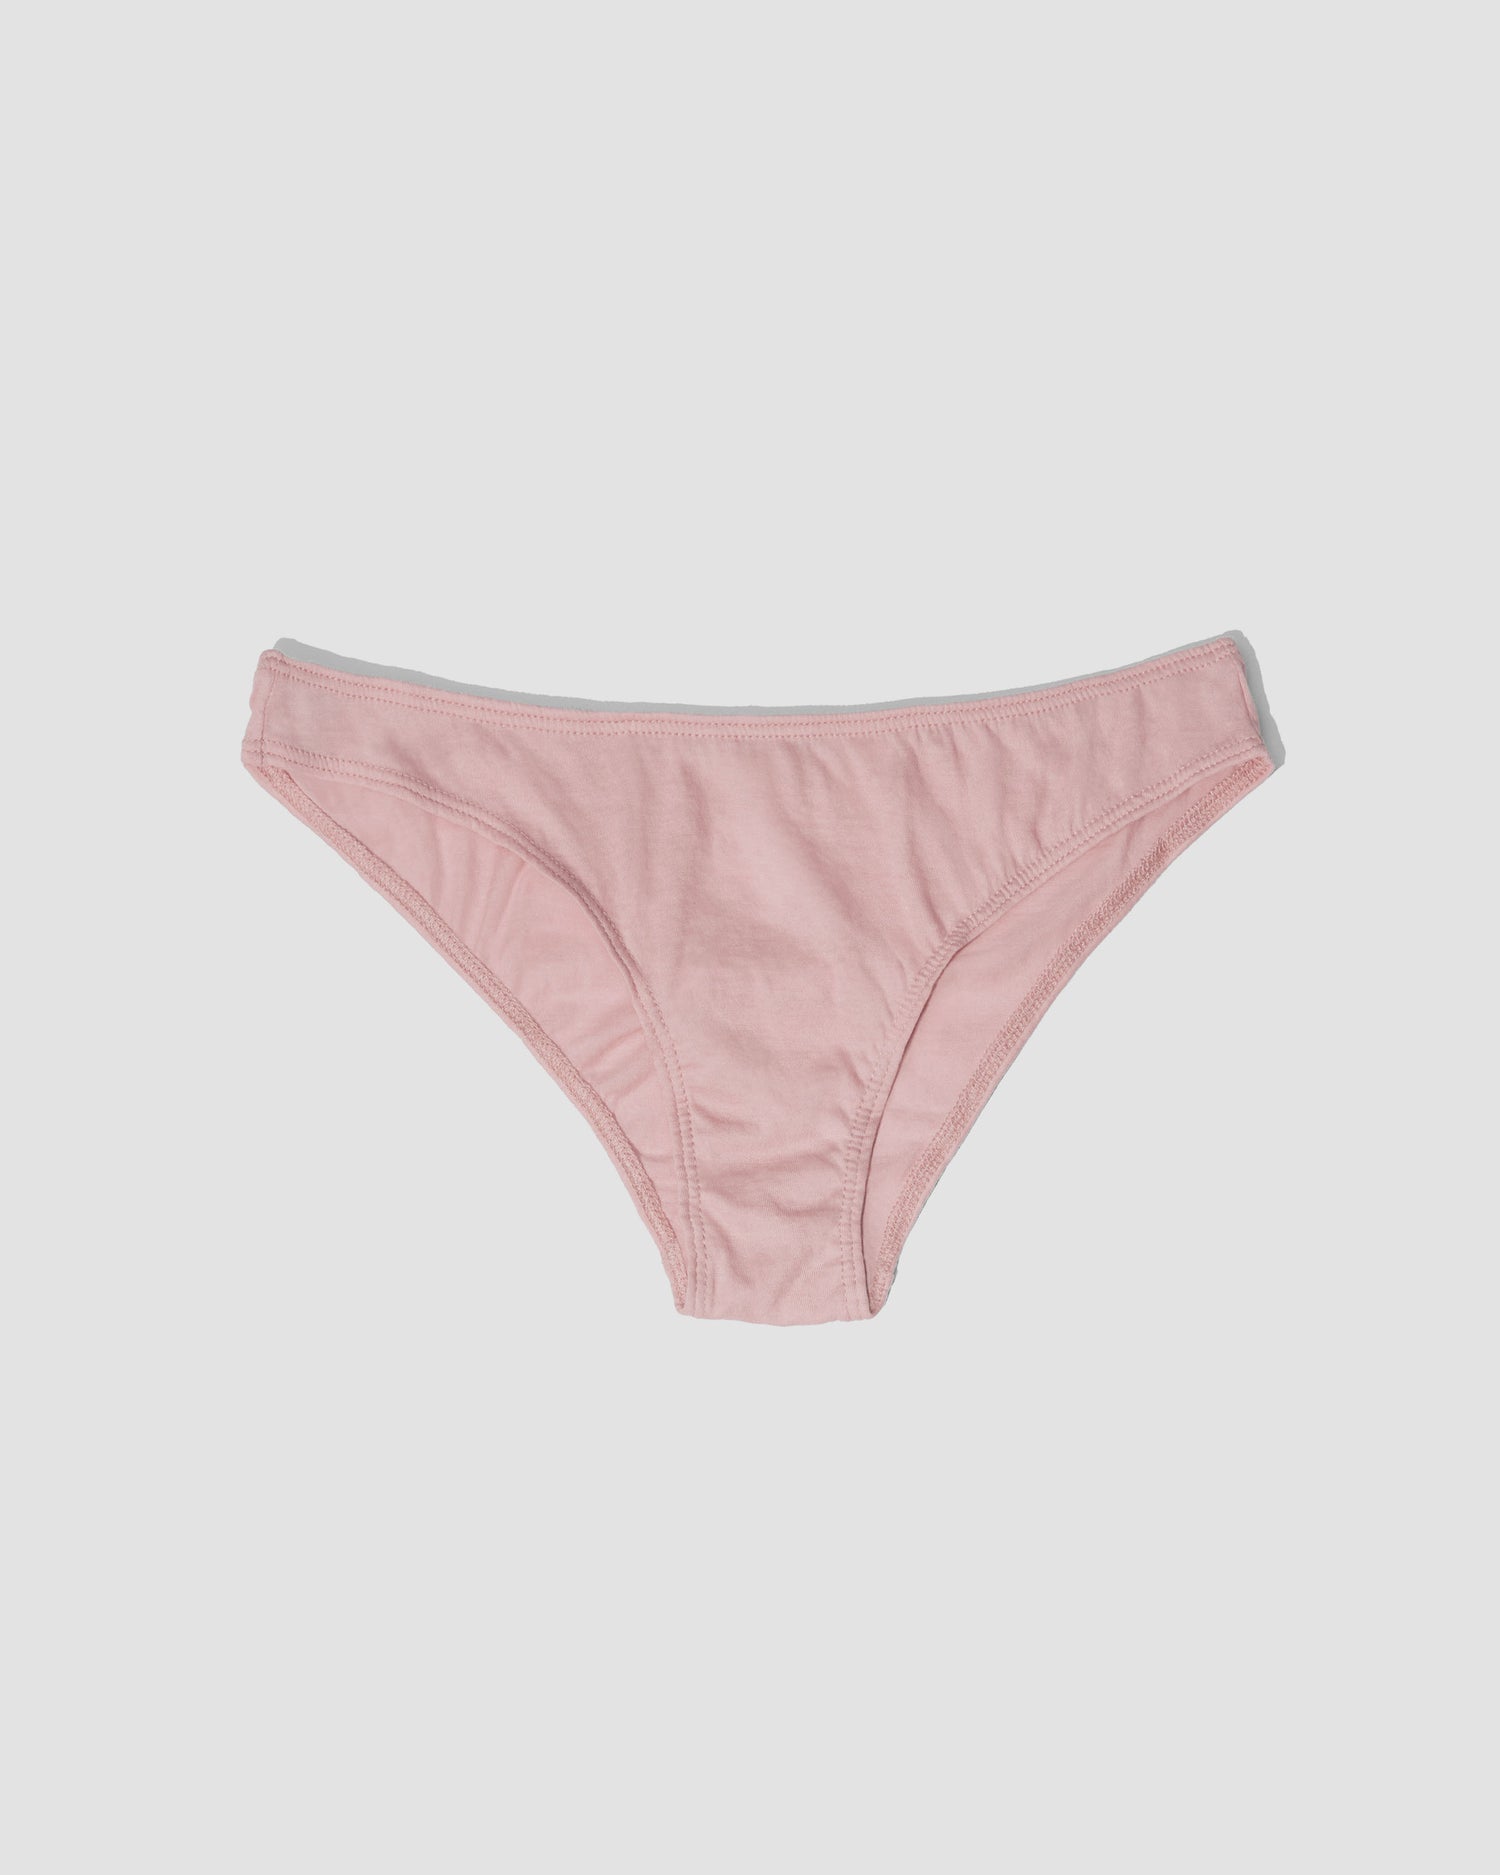 95% cotton thongs underwear with white or pink tape